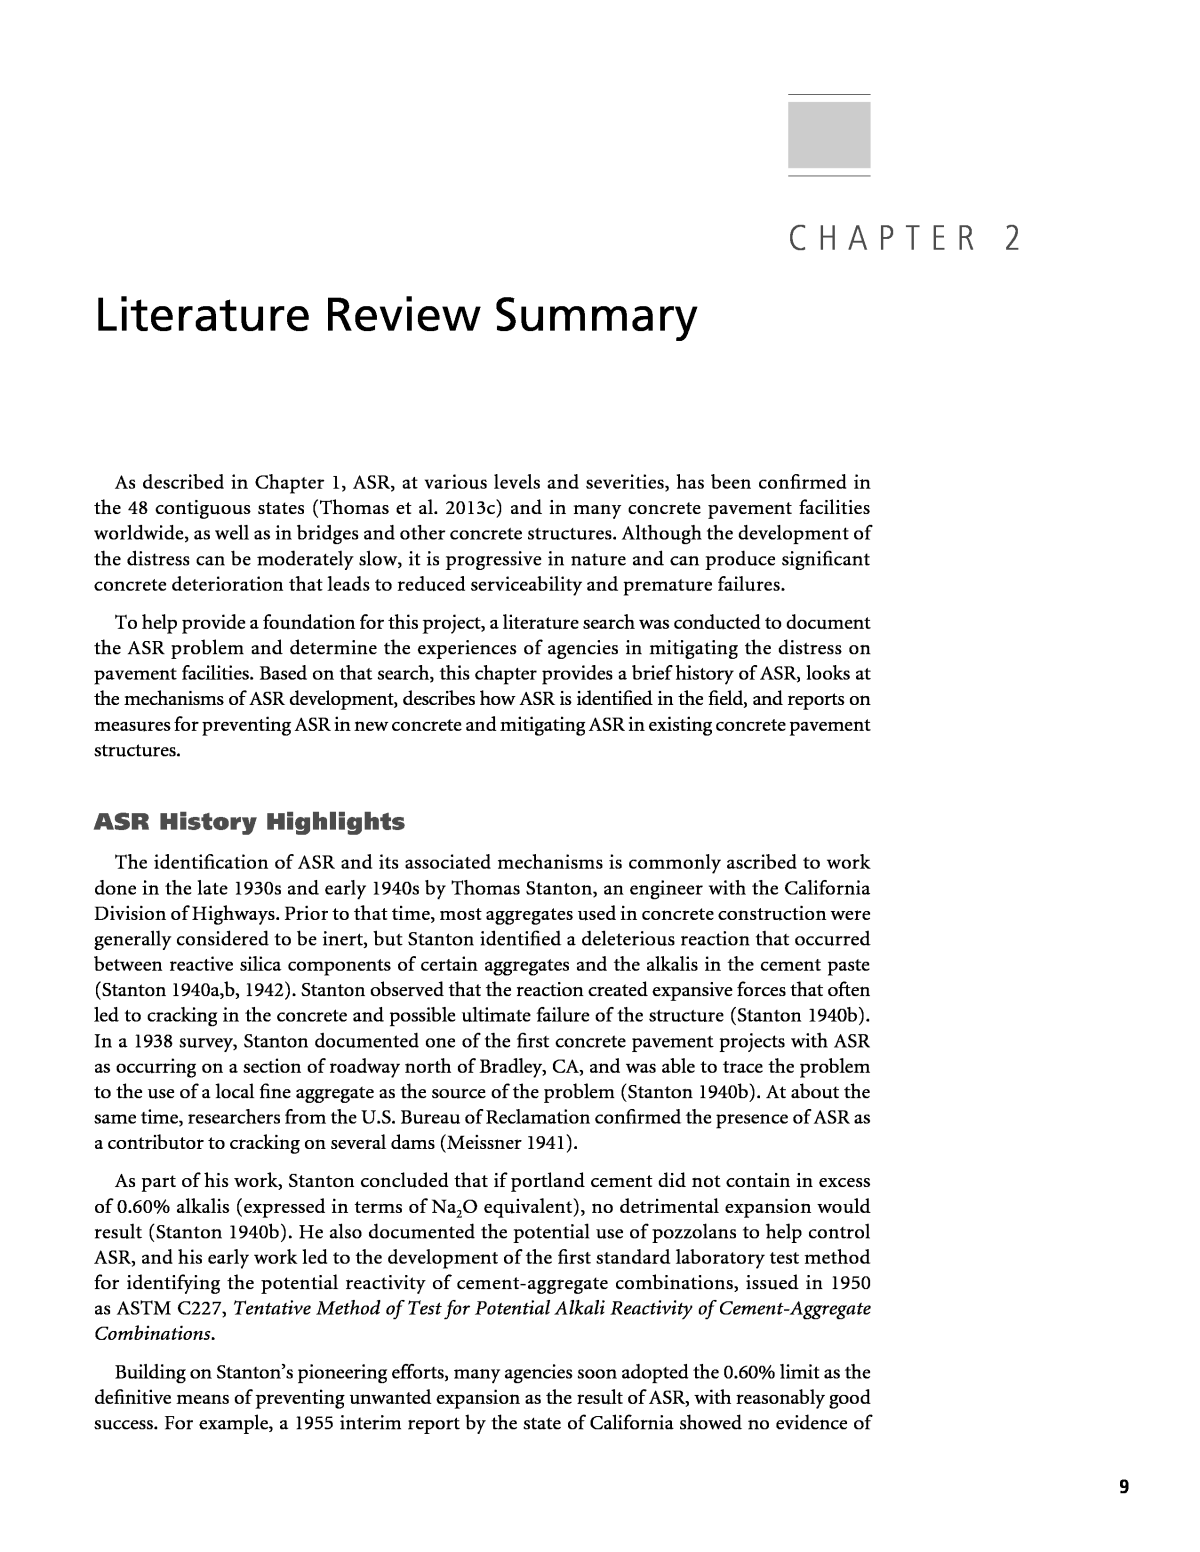 summary of the literature review chapter